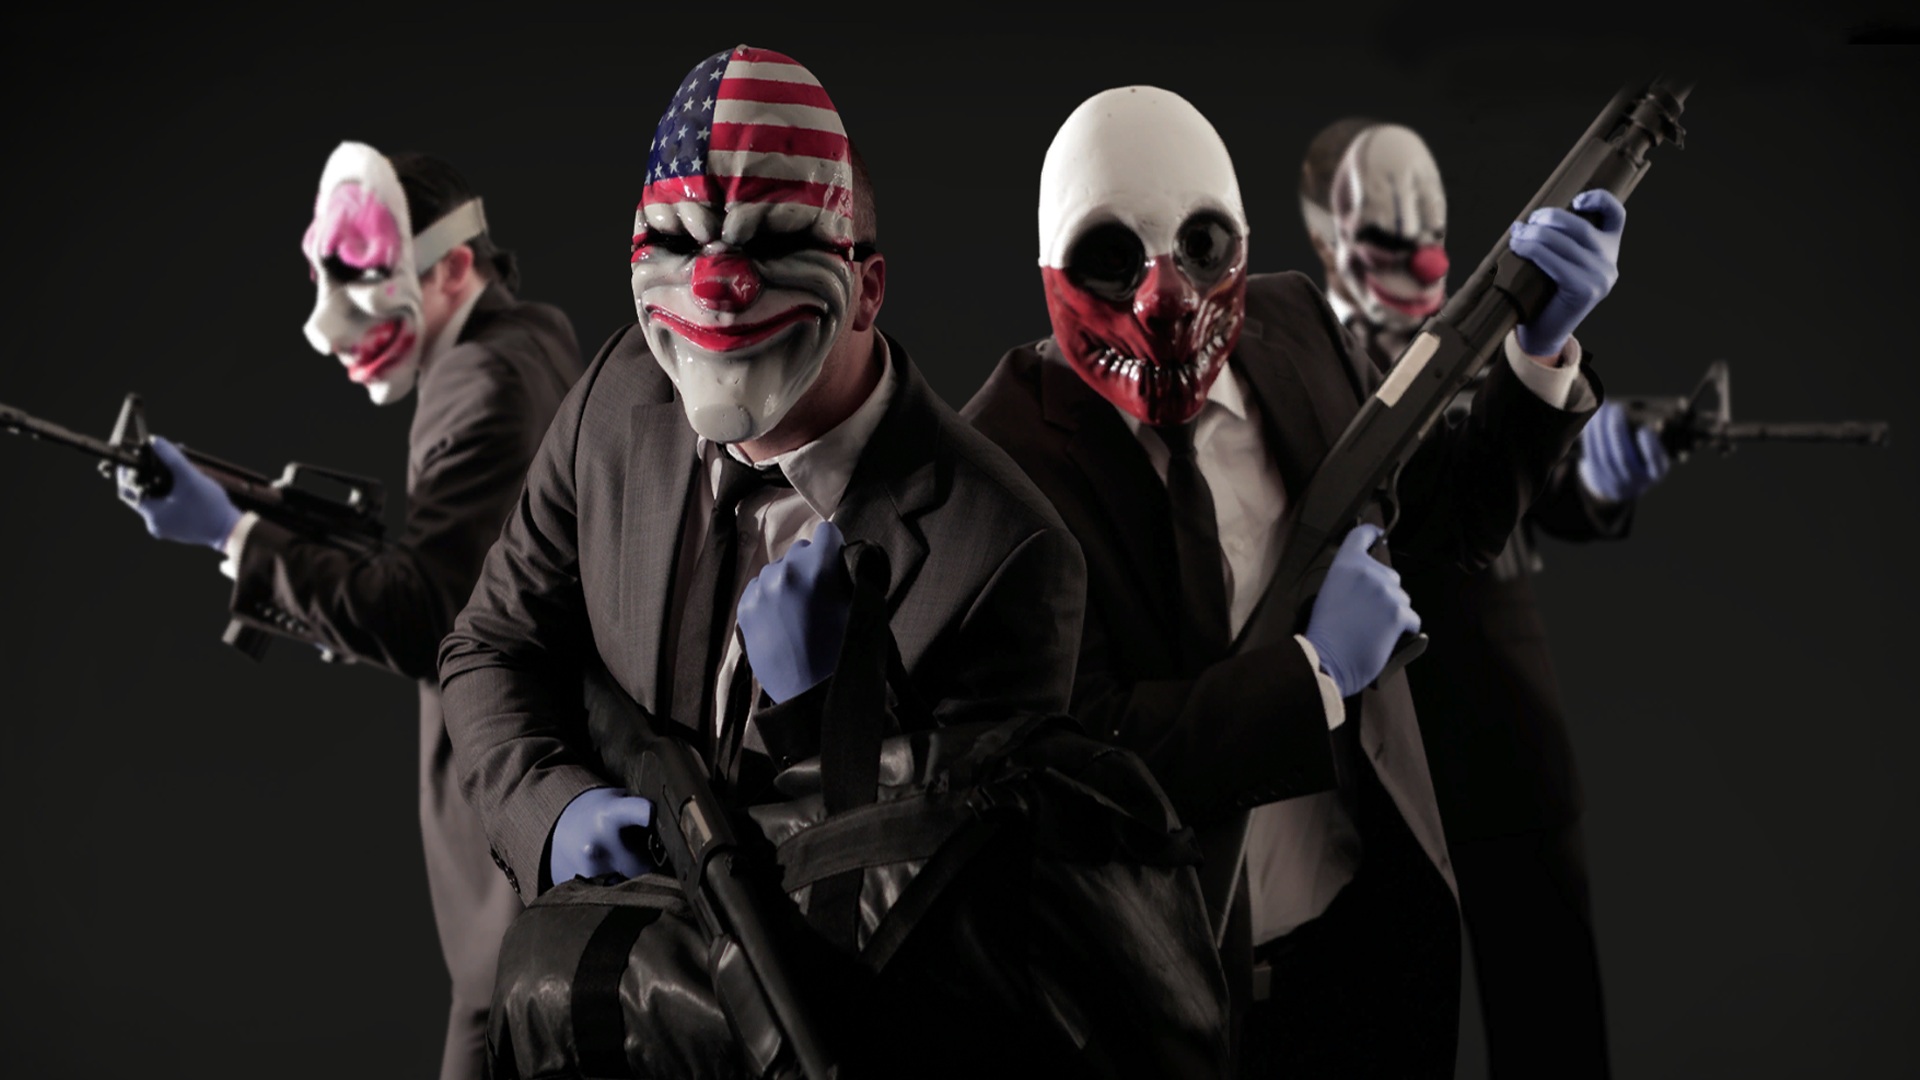 payday 2 trainer pc free download